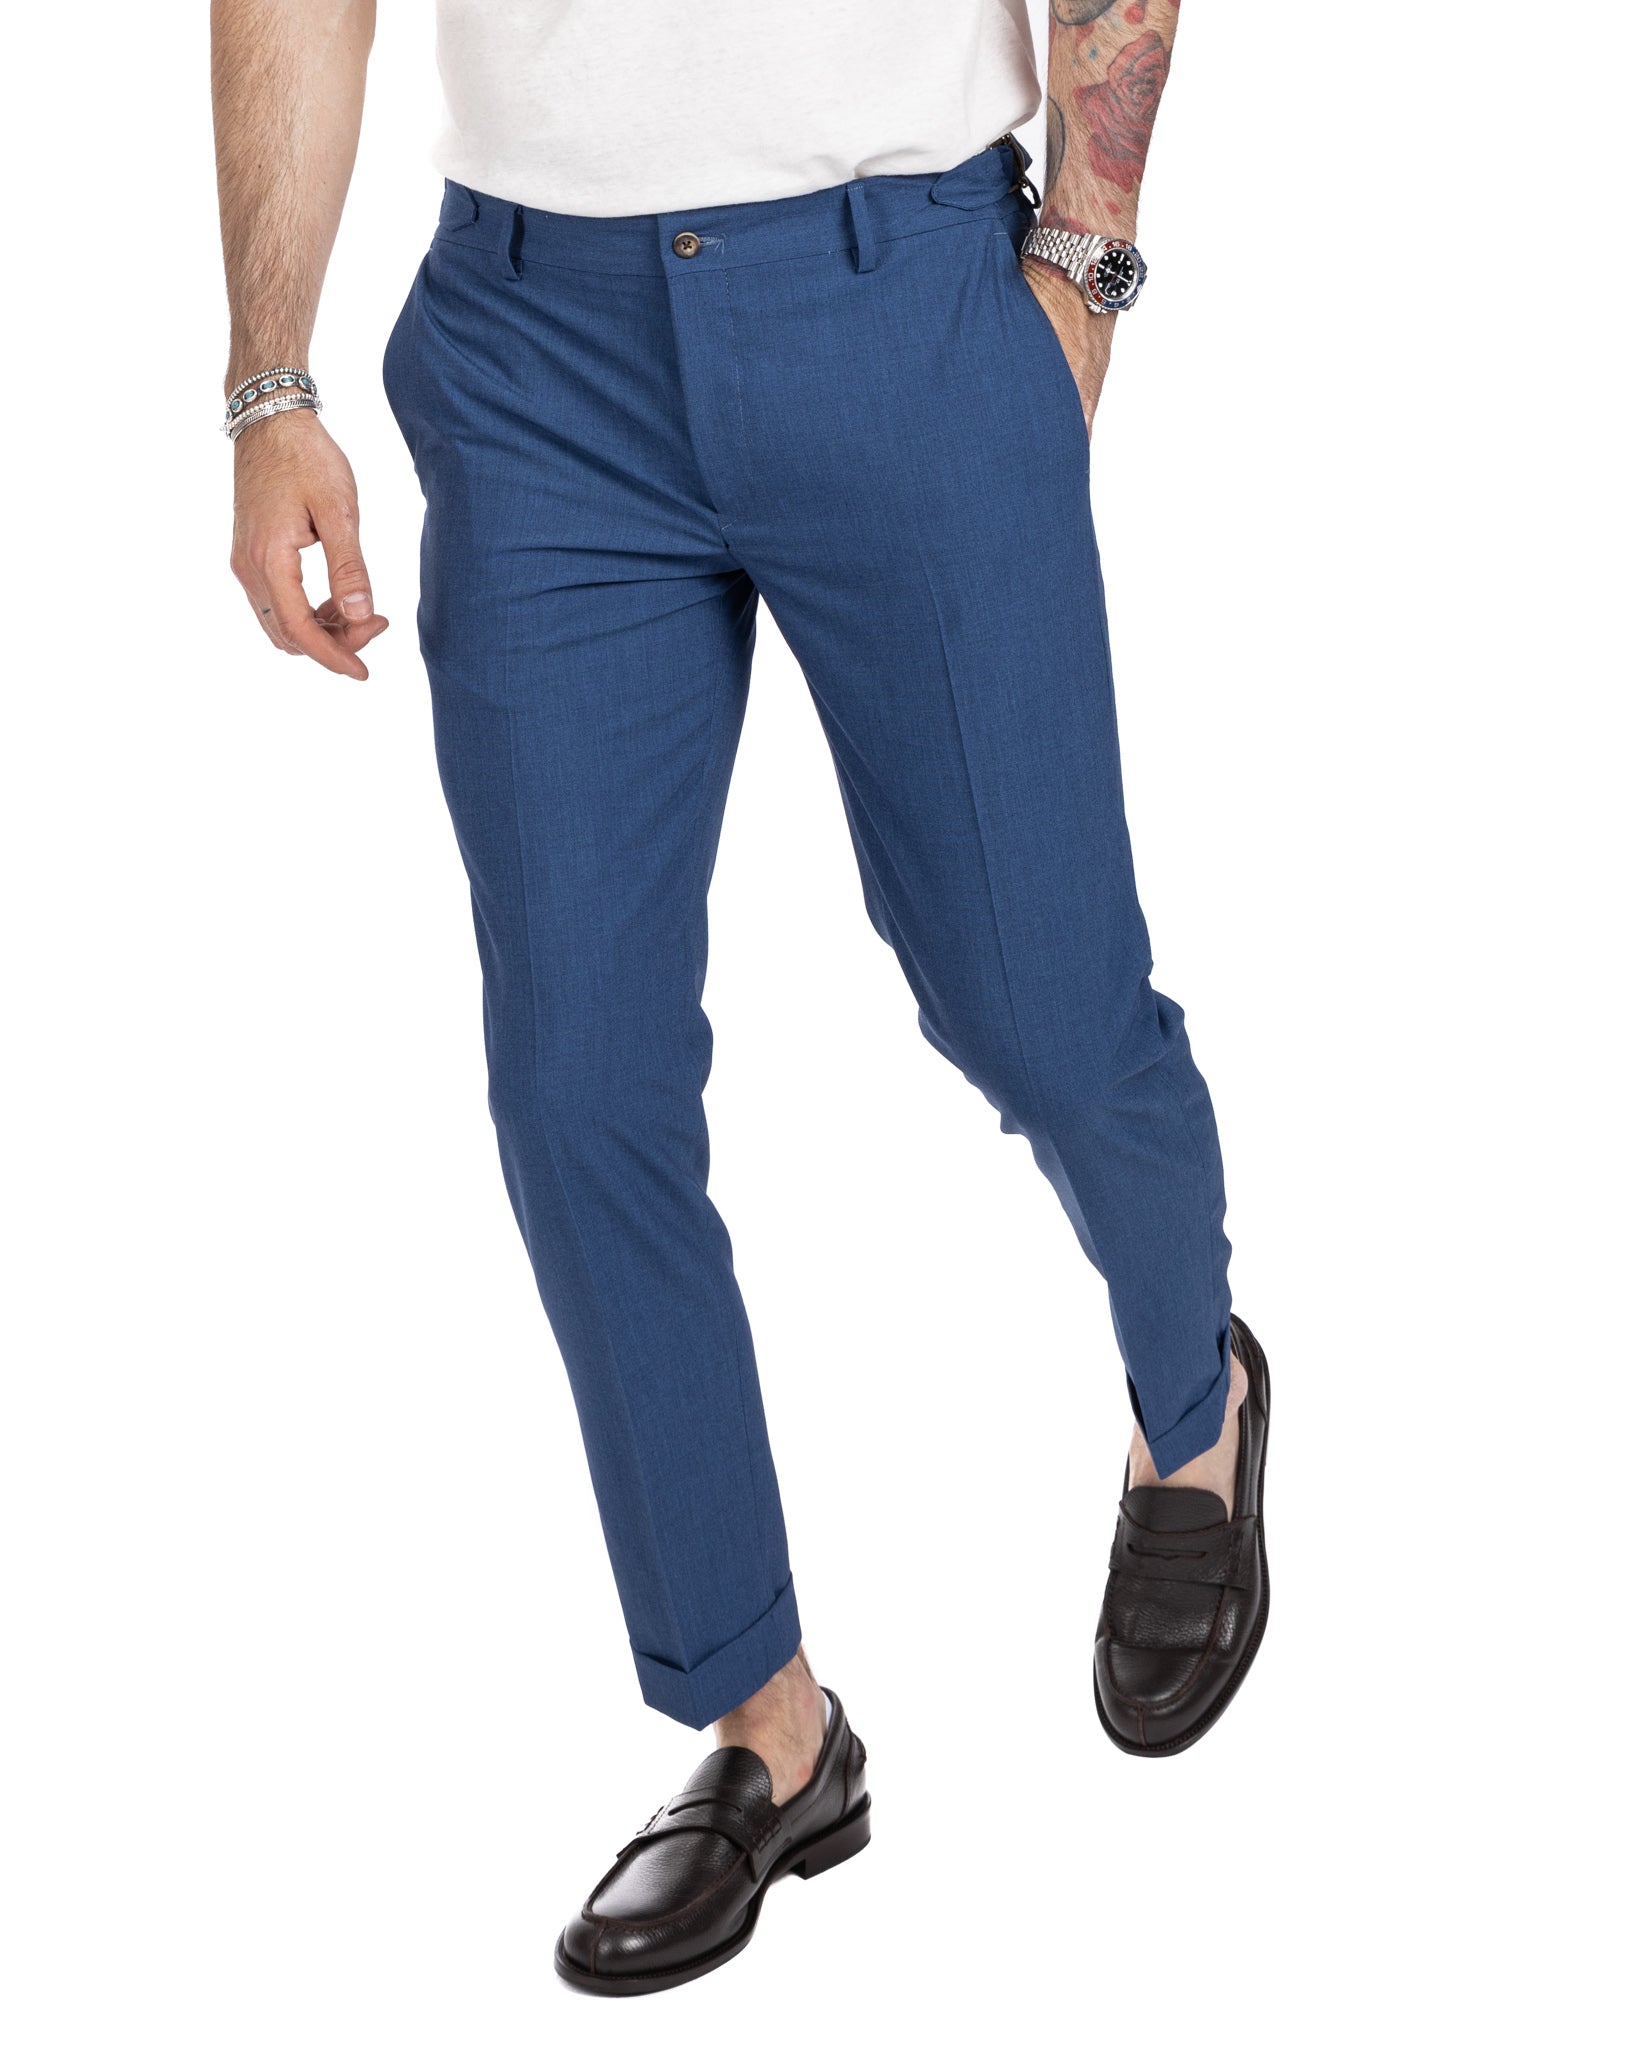 Trani - denim trousers with buckles